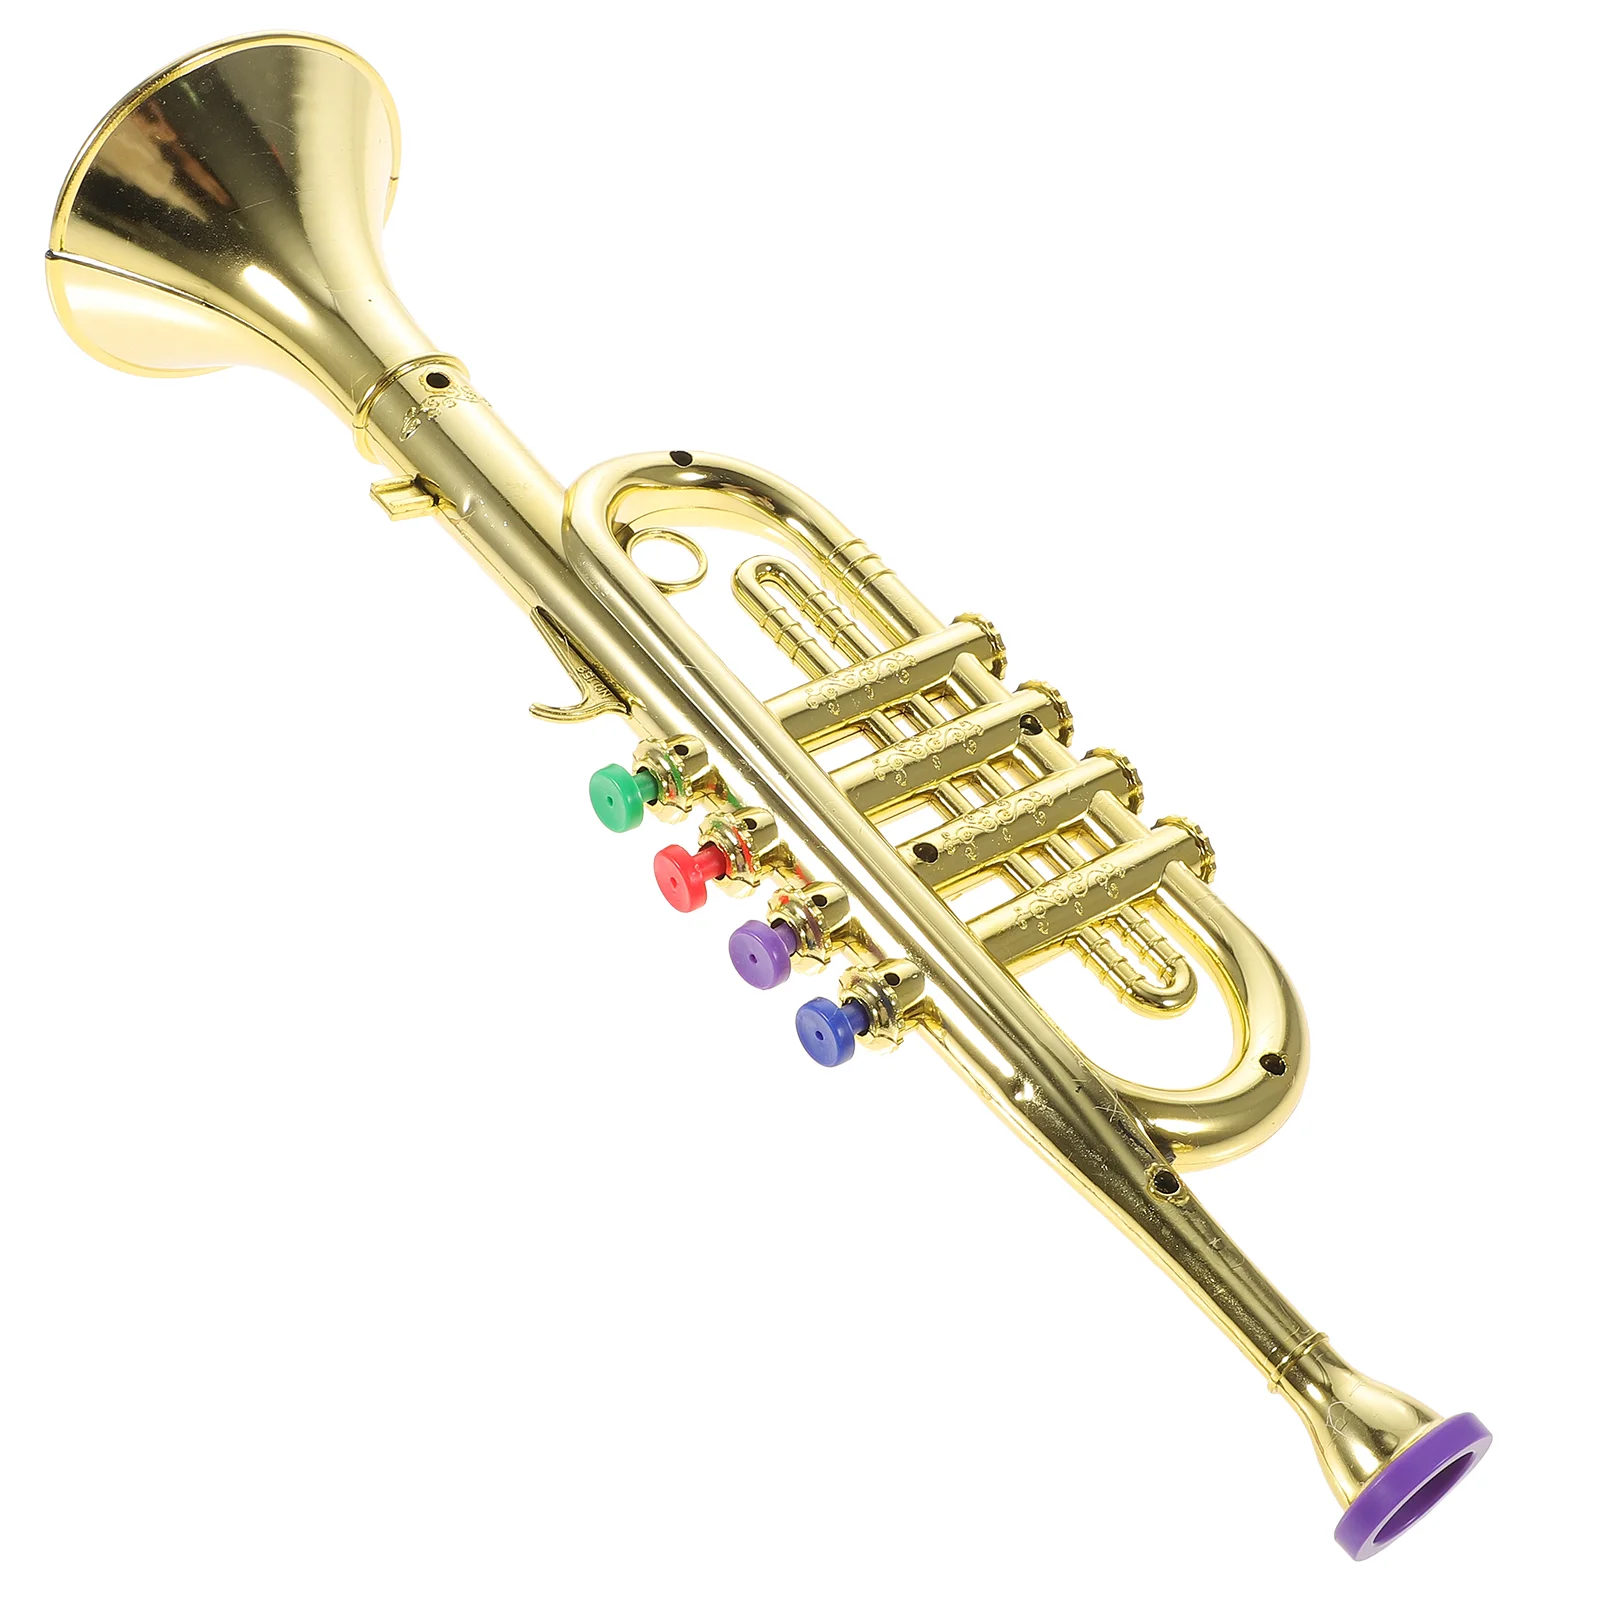 Alto Sax Toys Birthday Party Favor Children Musical Instrument Toy Trumpet Toy Musical Instrument Model